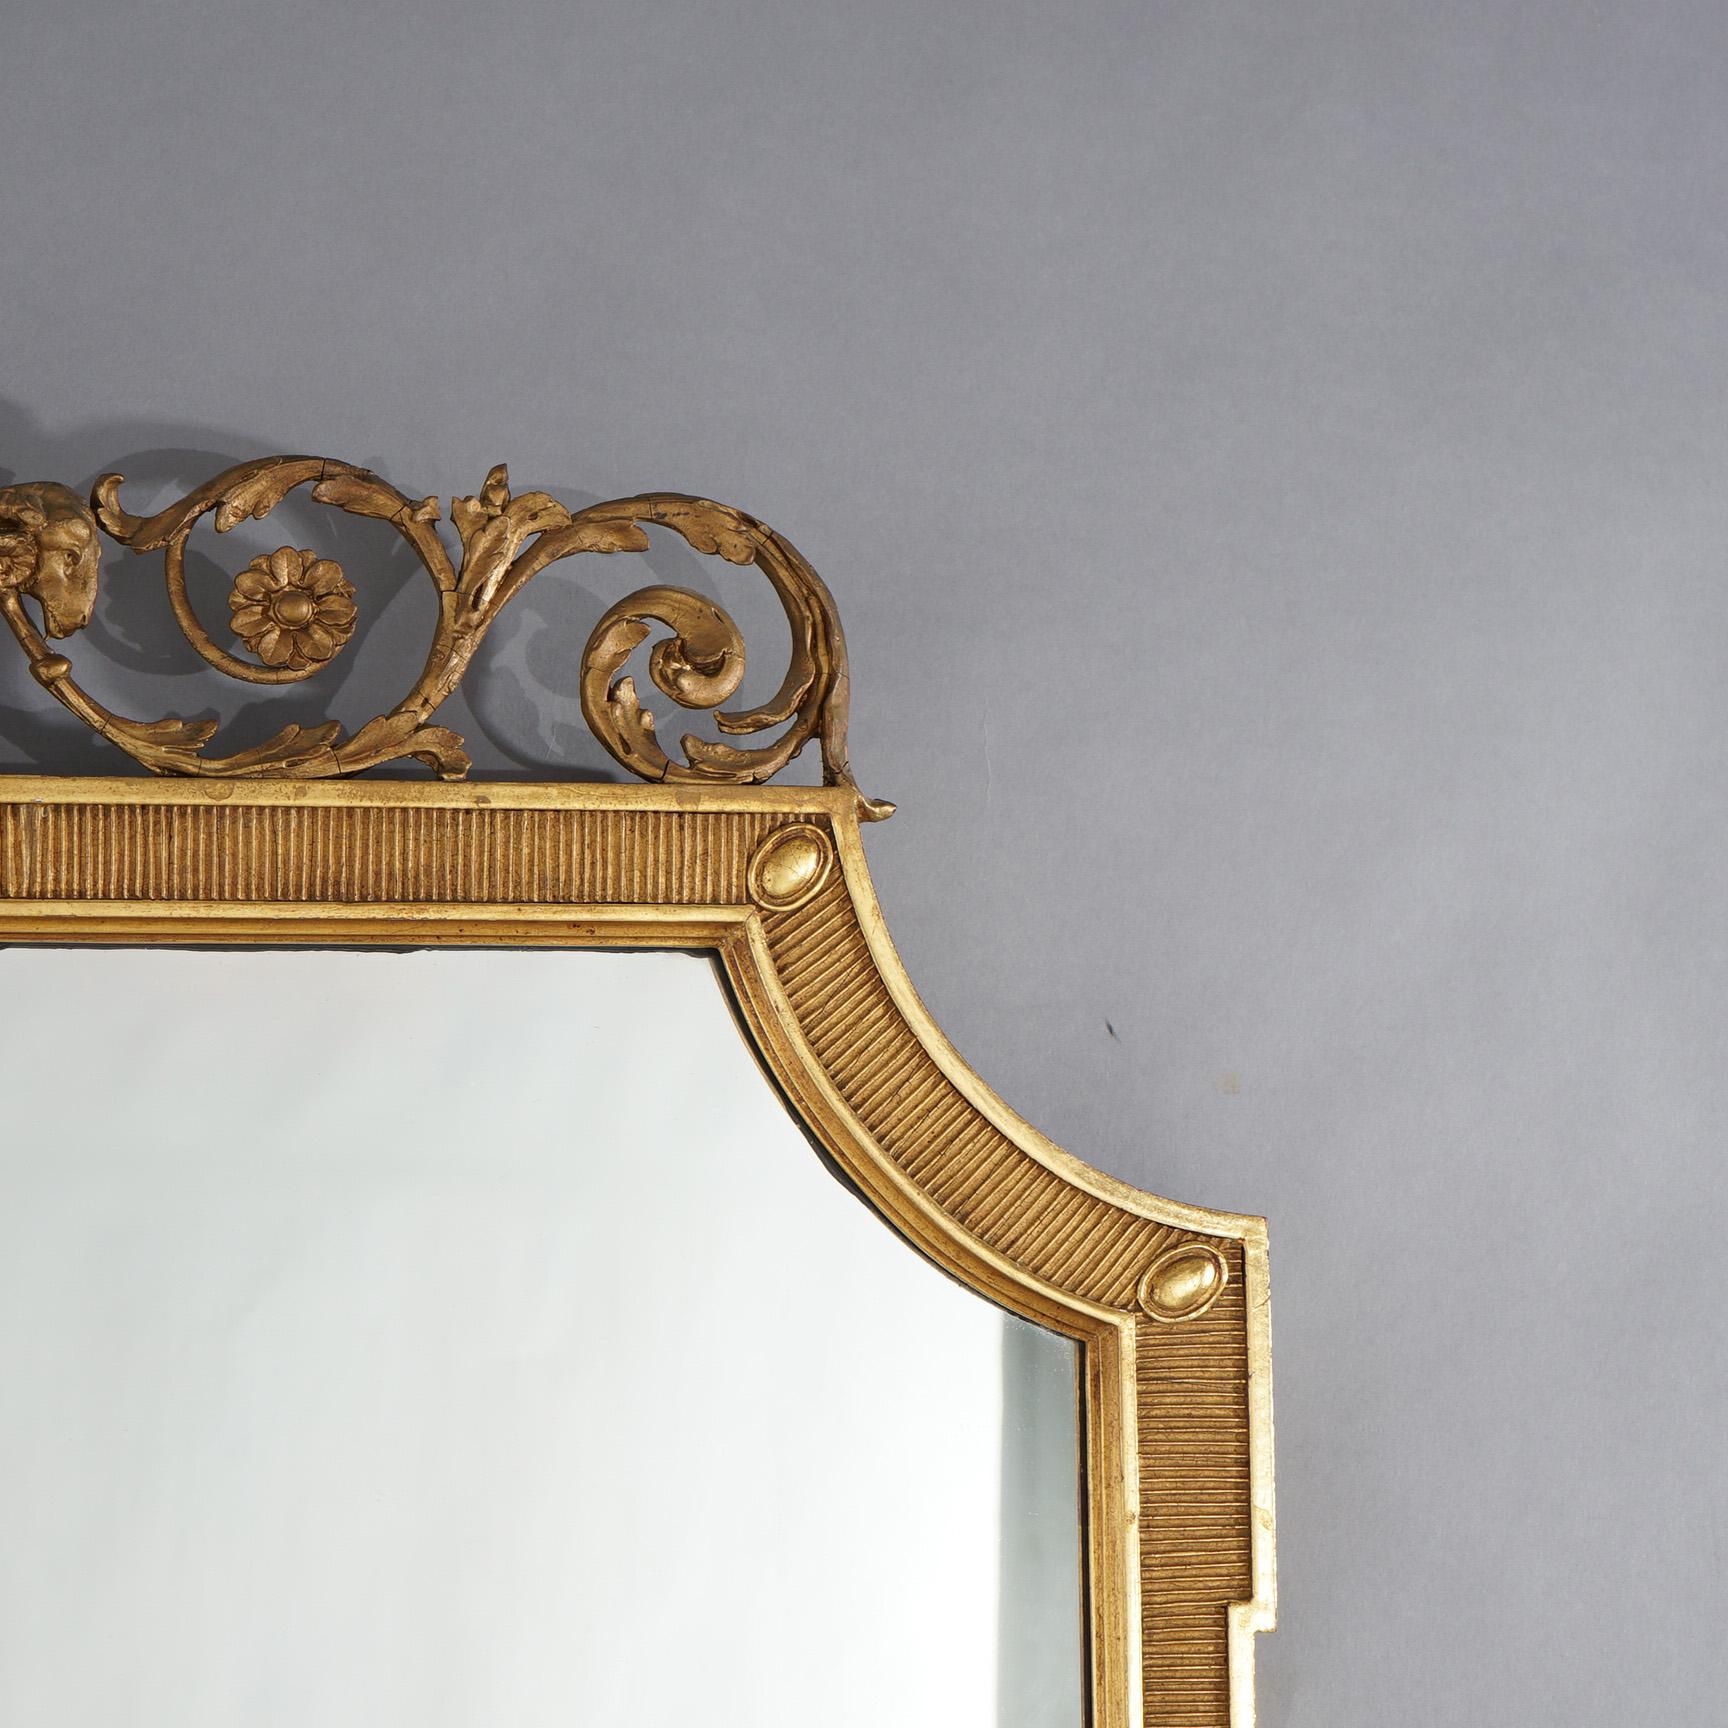 20th Century Antique French Empire Oversized Giltwood Wall Mirror C1920